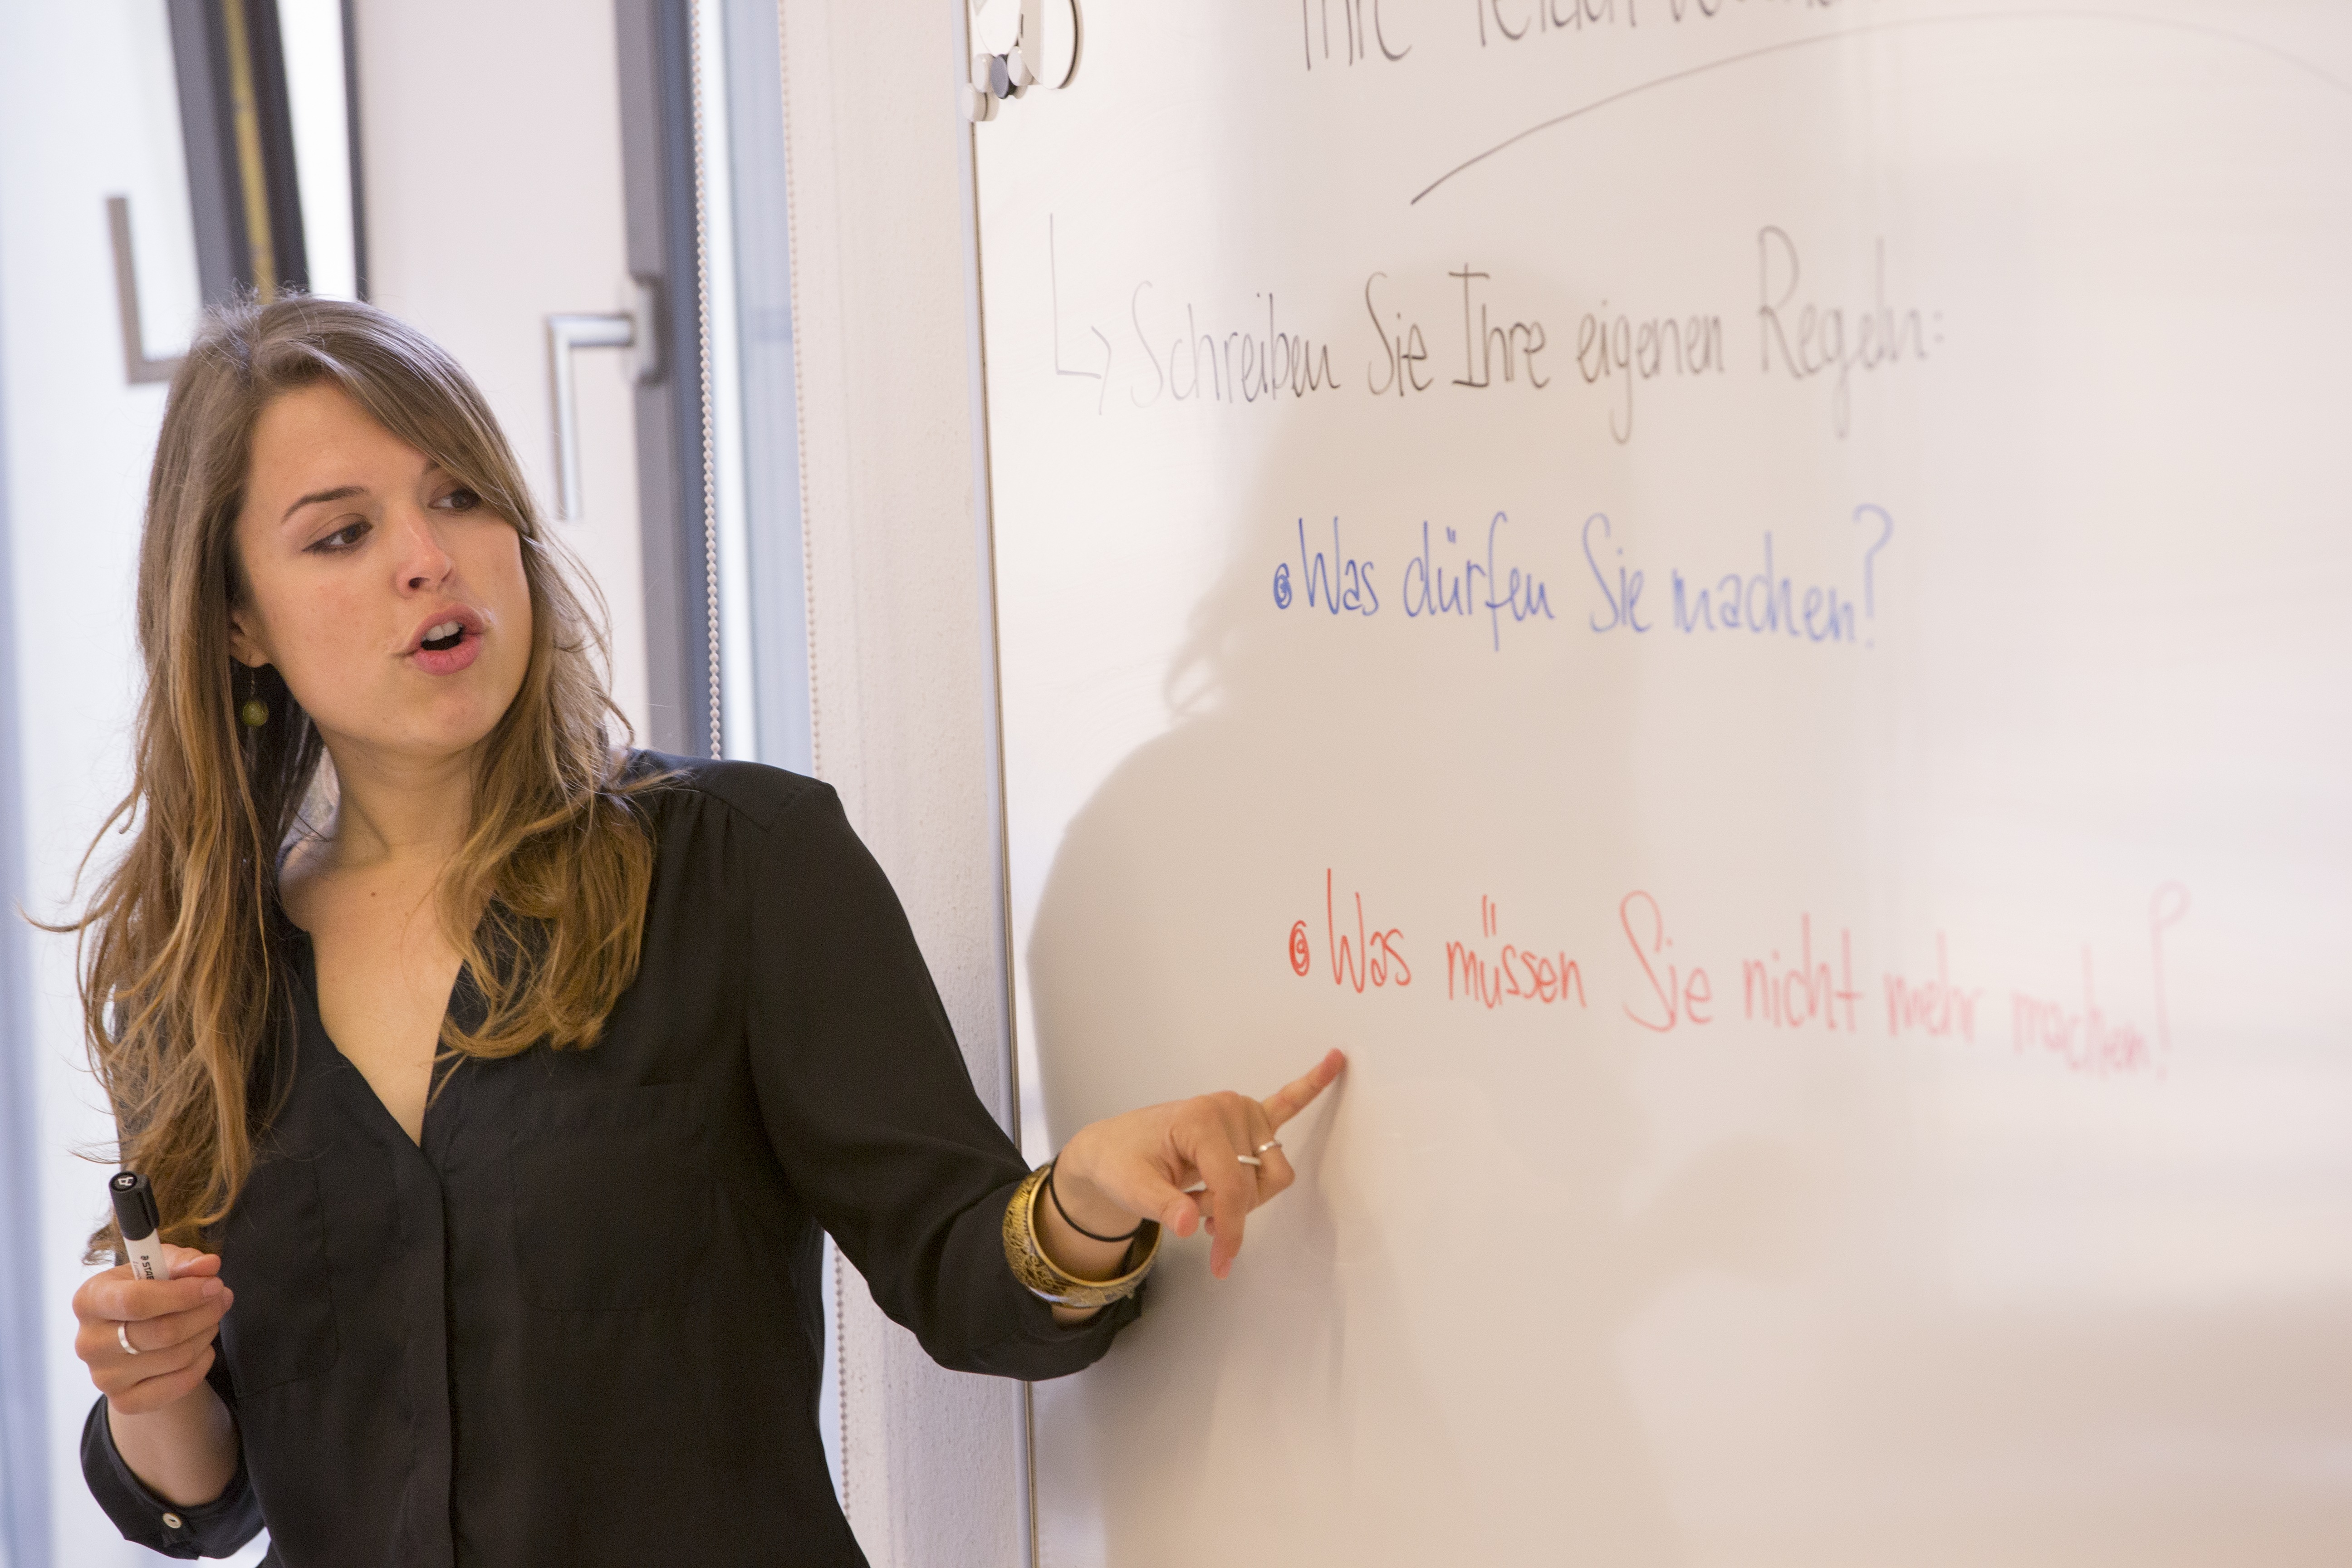 A foreign language teacher lecturing at a whiteboard.